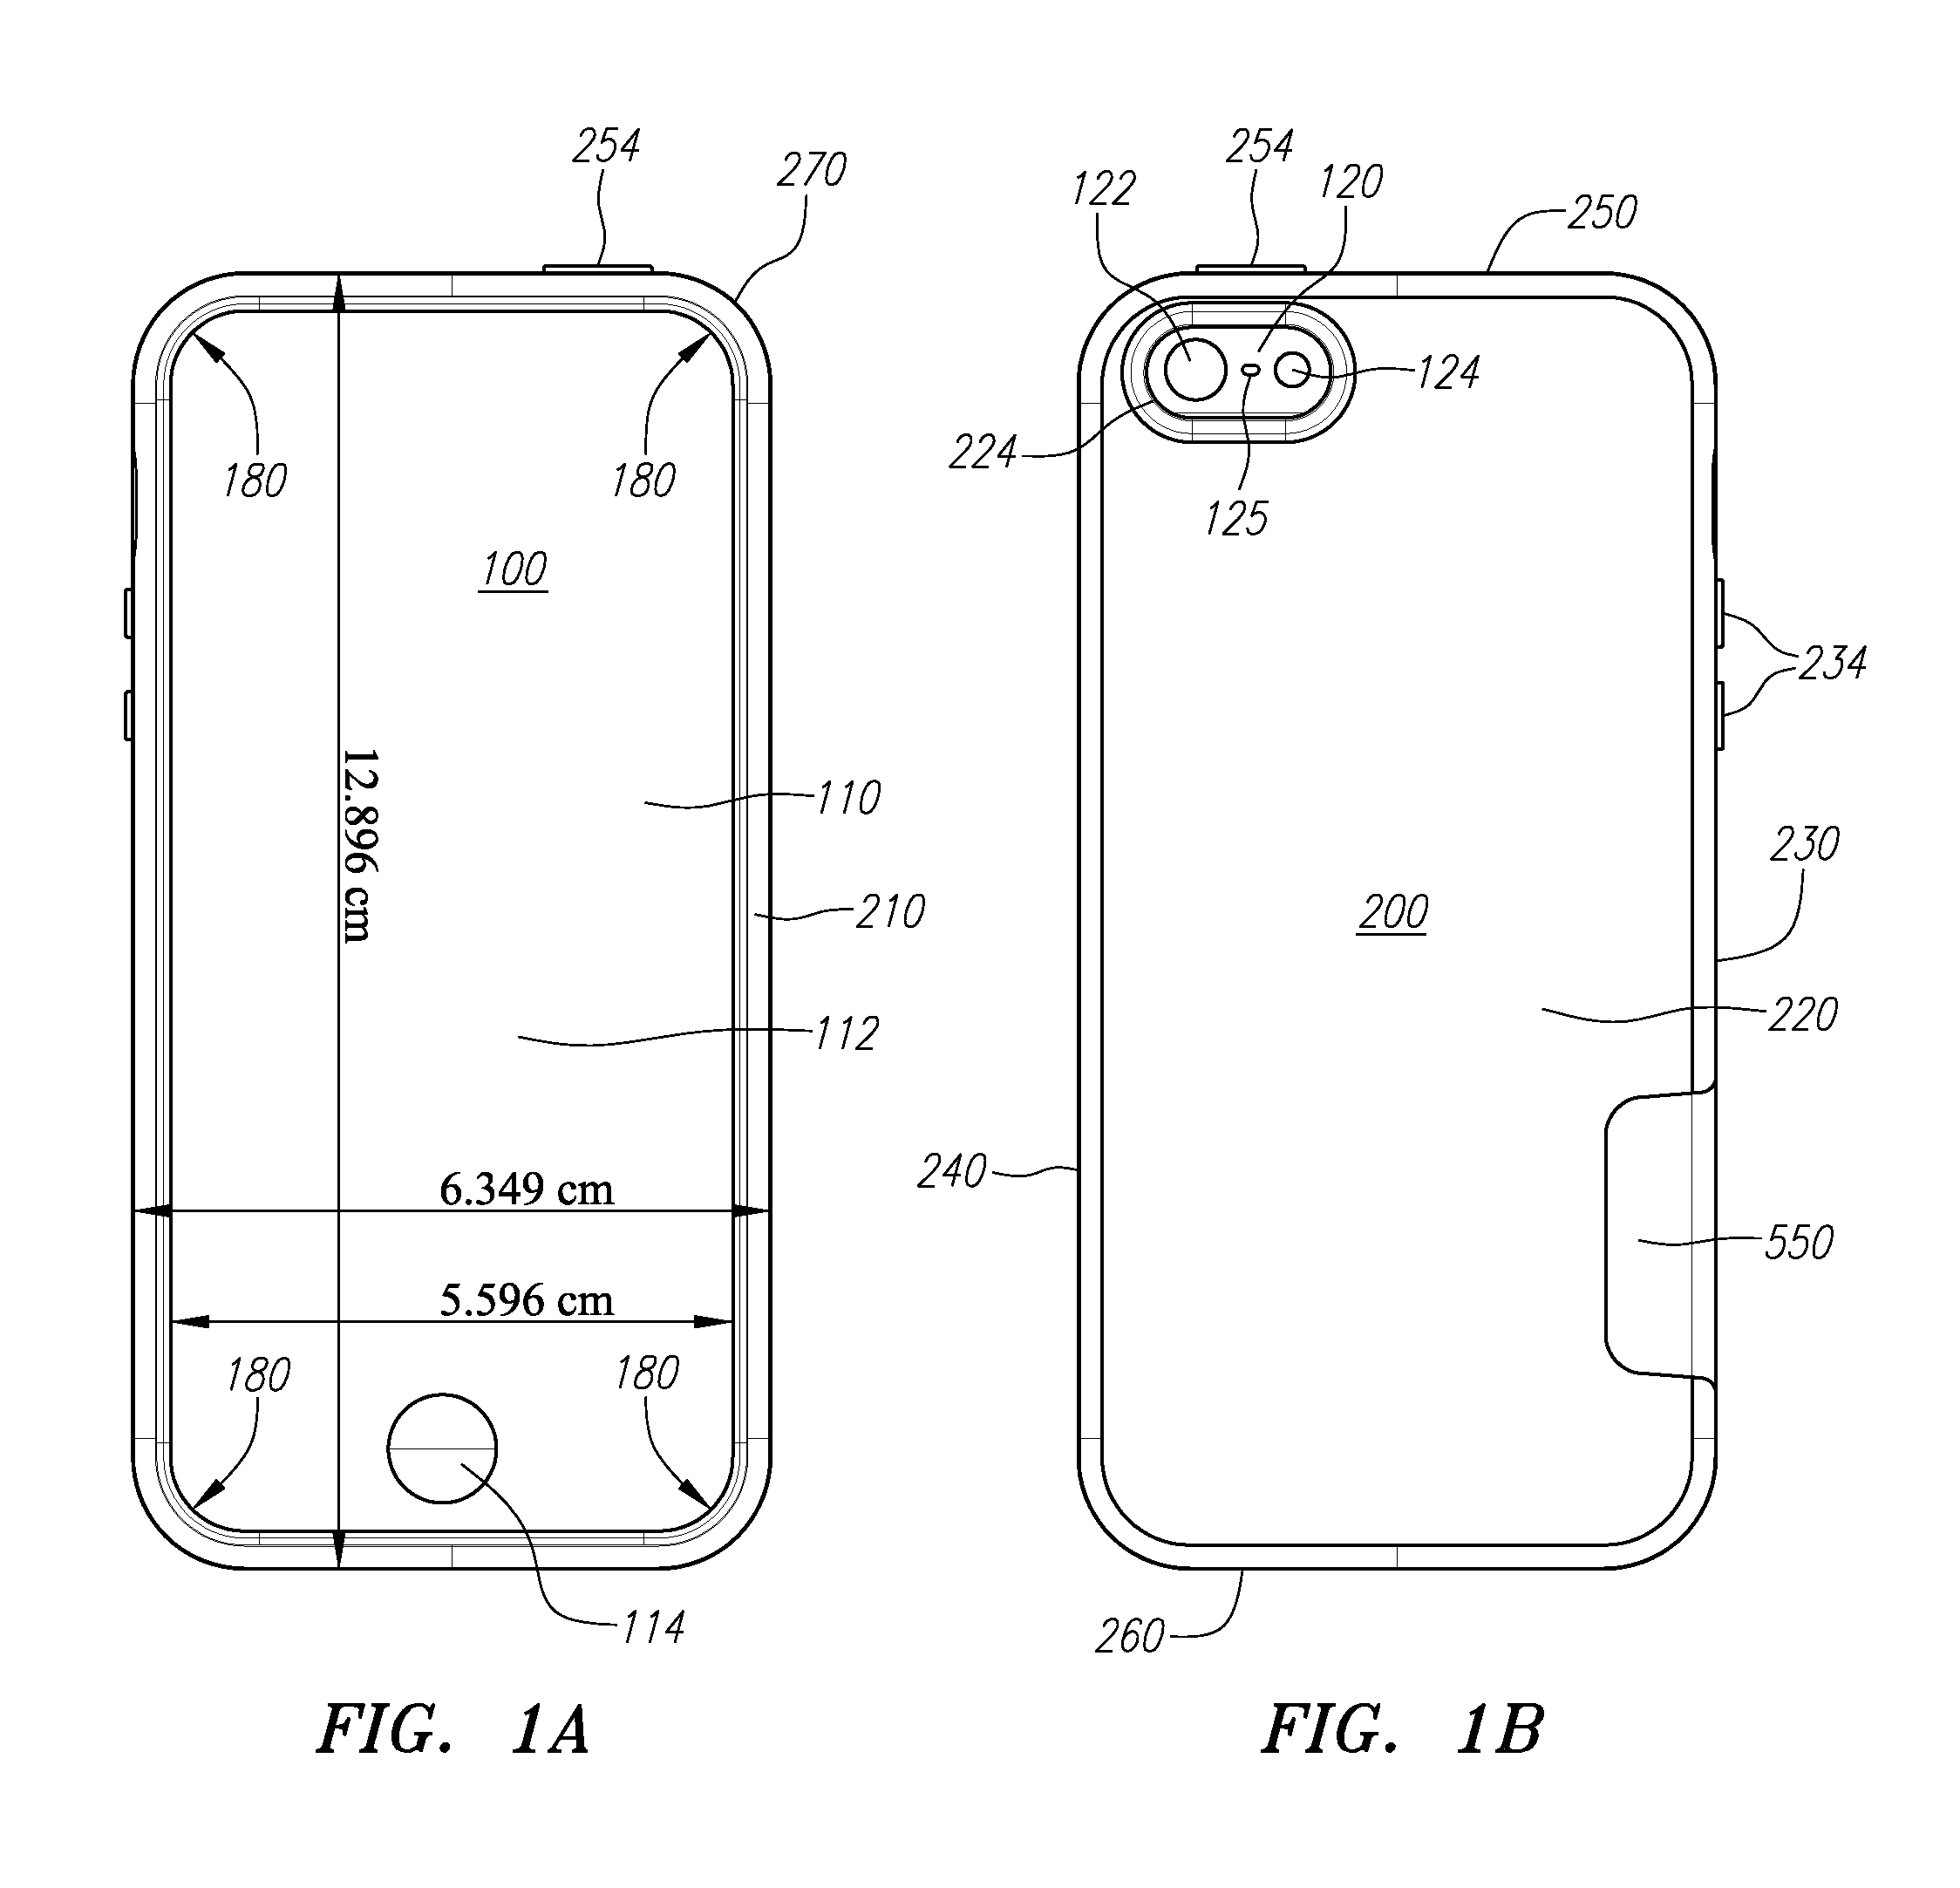 Co-molded multi-layered protective case for mobile device